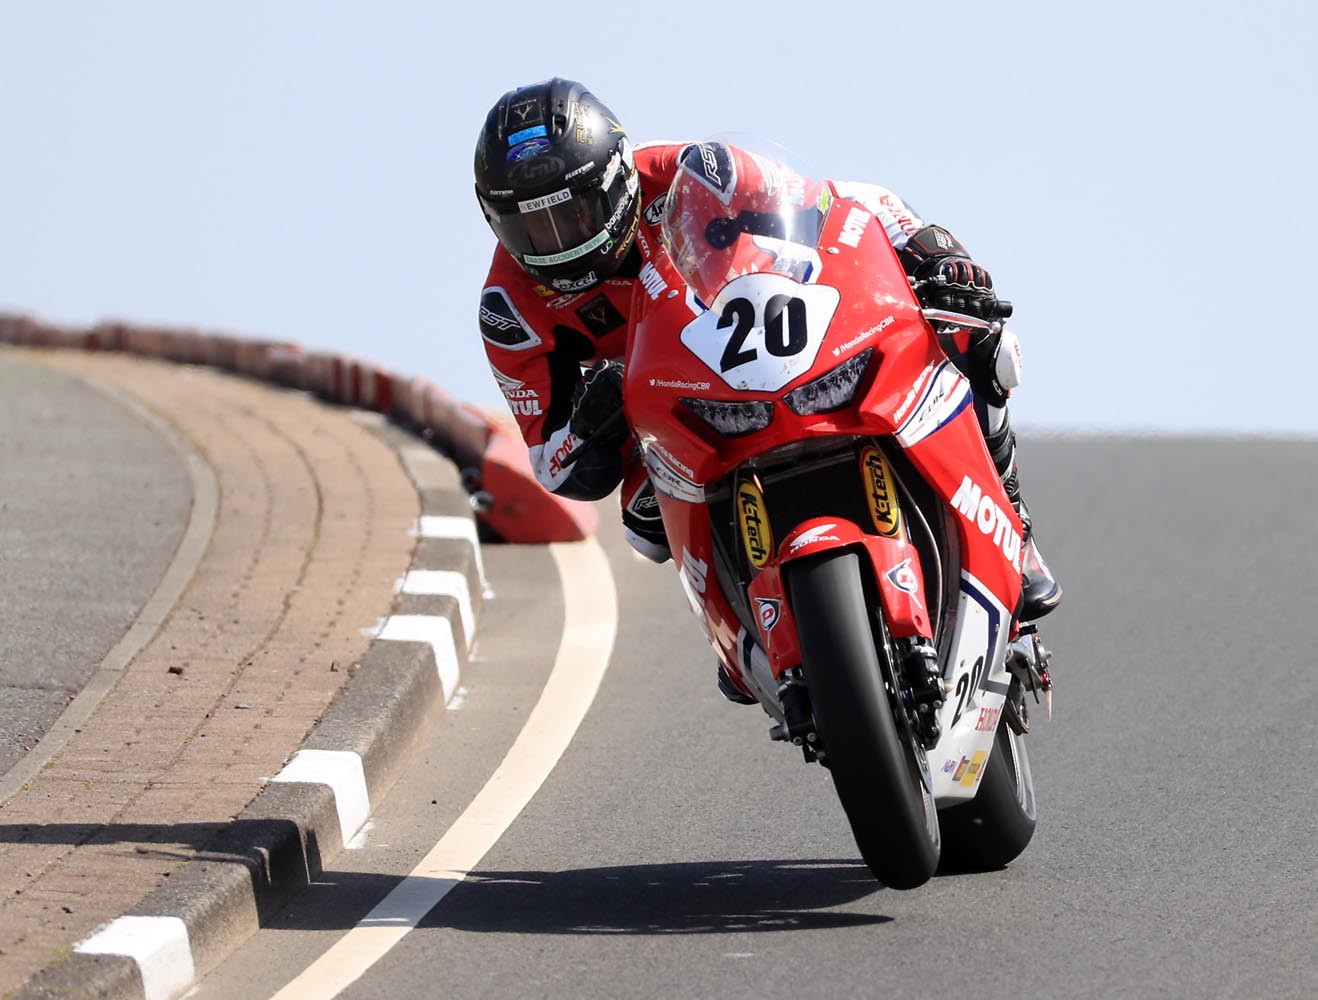 TT 2019: Johnson Looking Forward To TT Return After Character Building North West 200